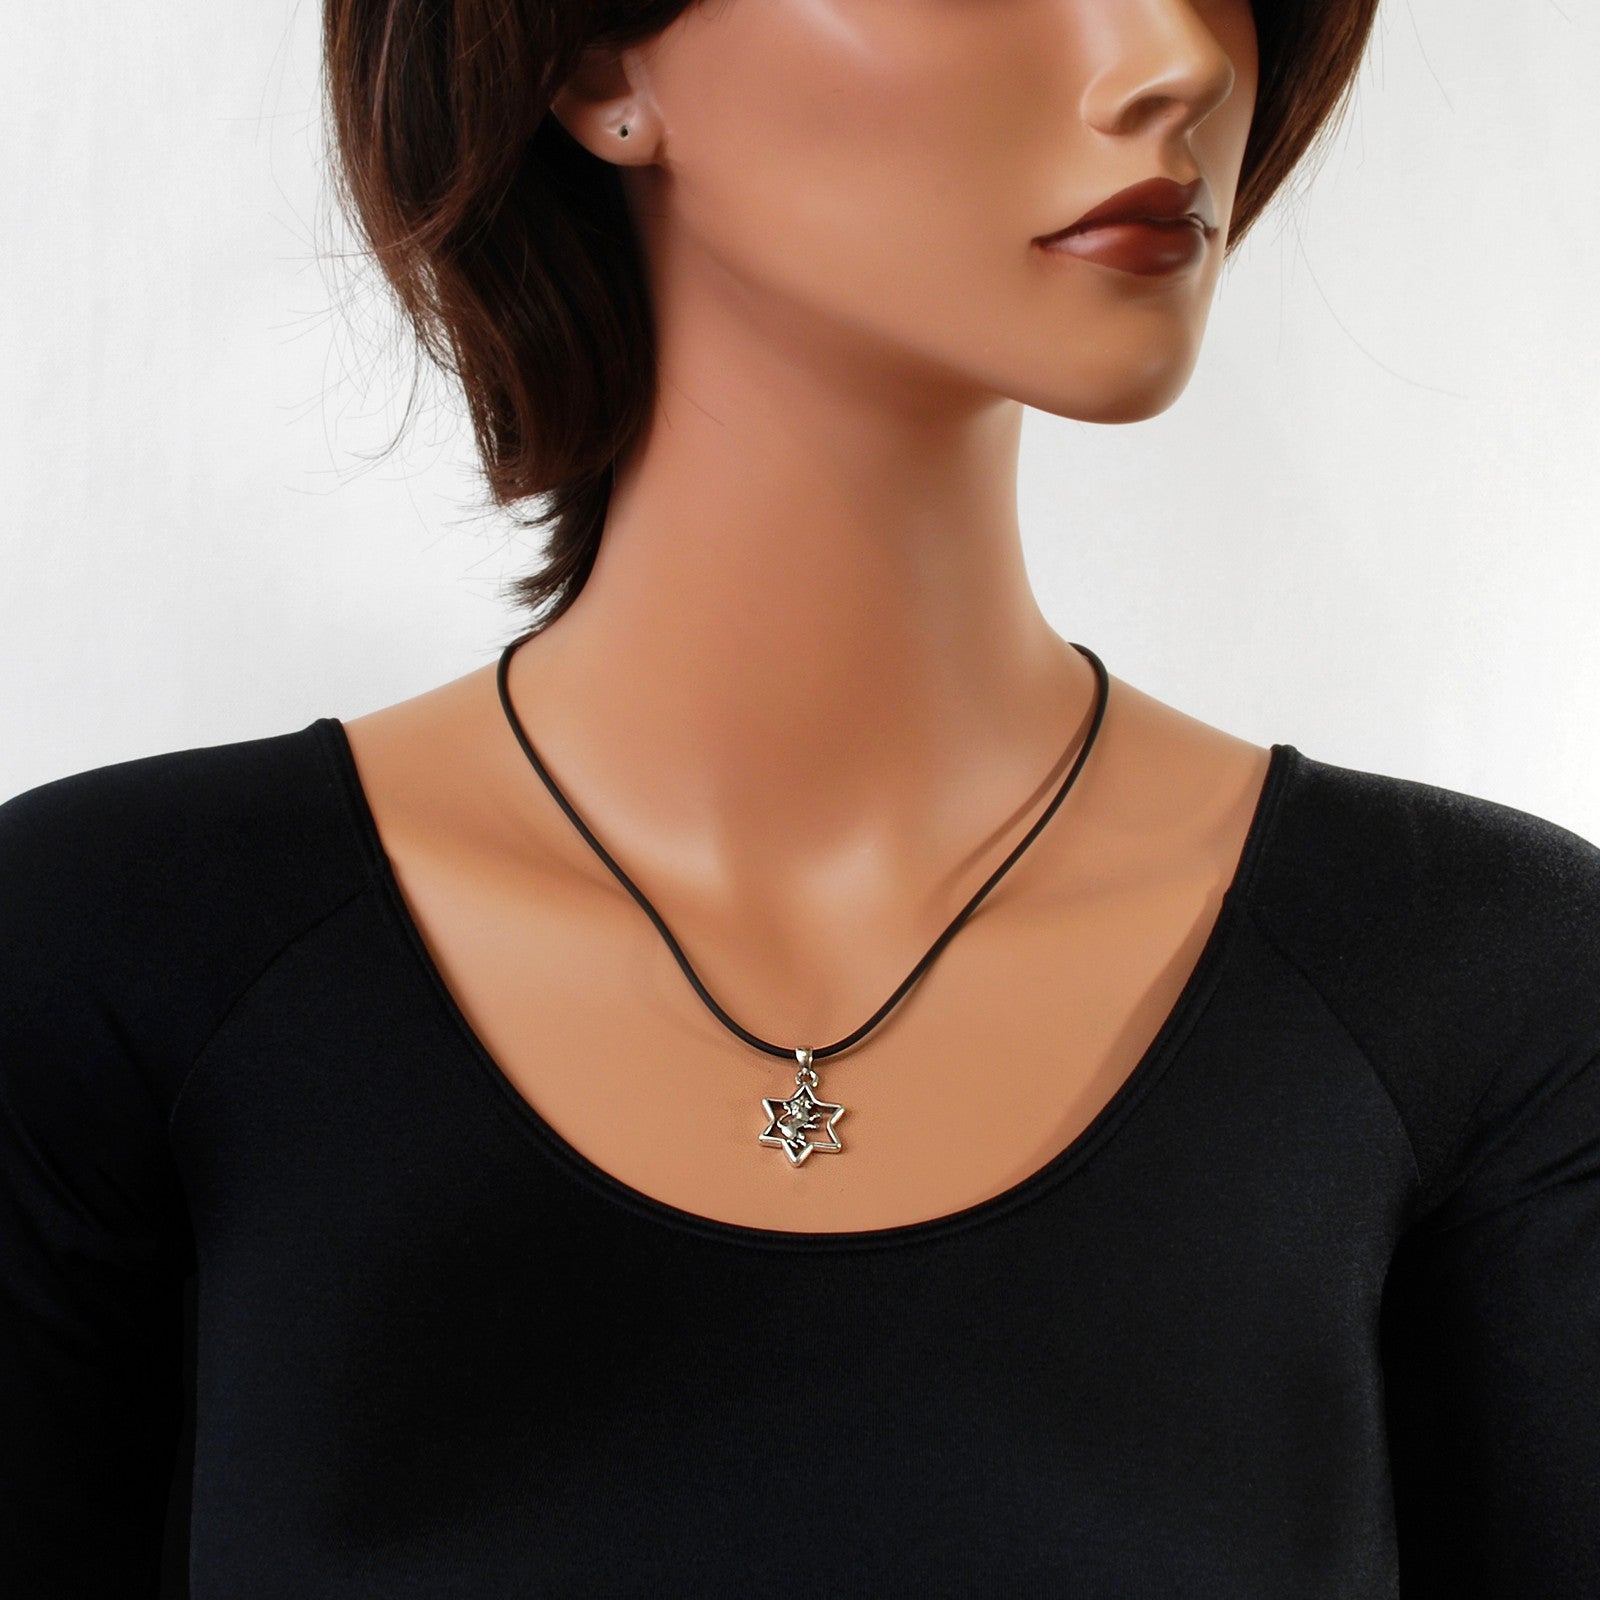 Leather Cord Necklace and Domed Drop Pendant - Milor